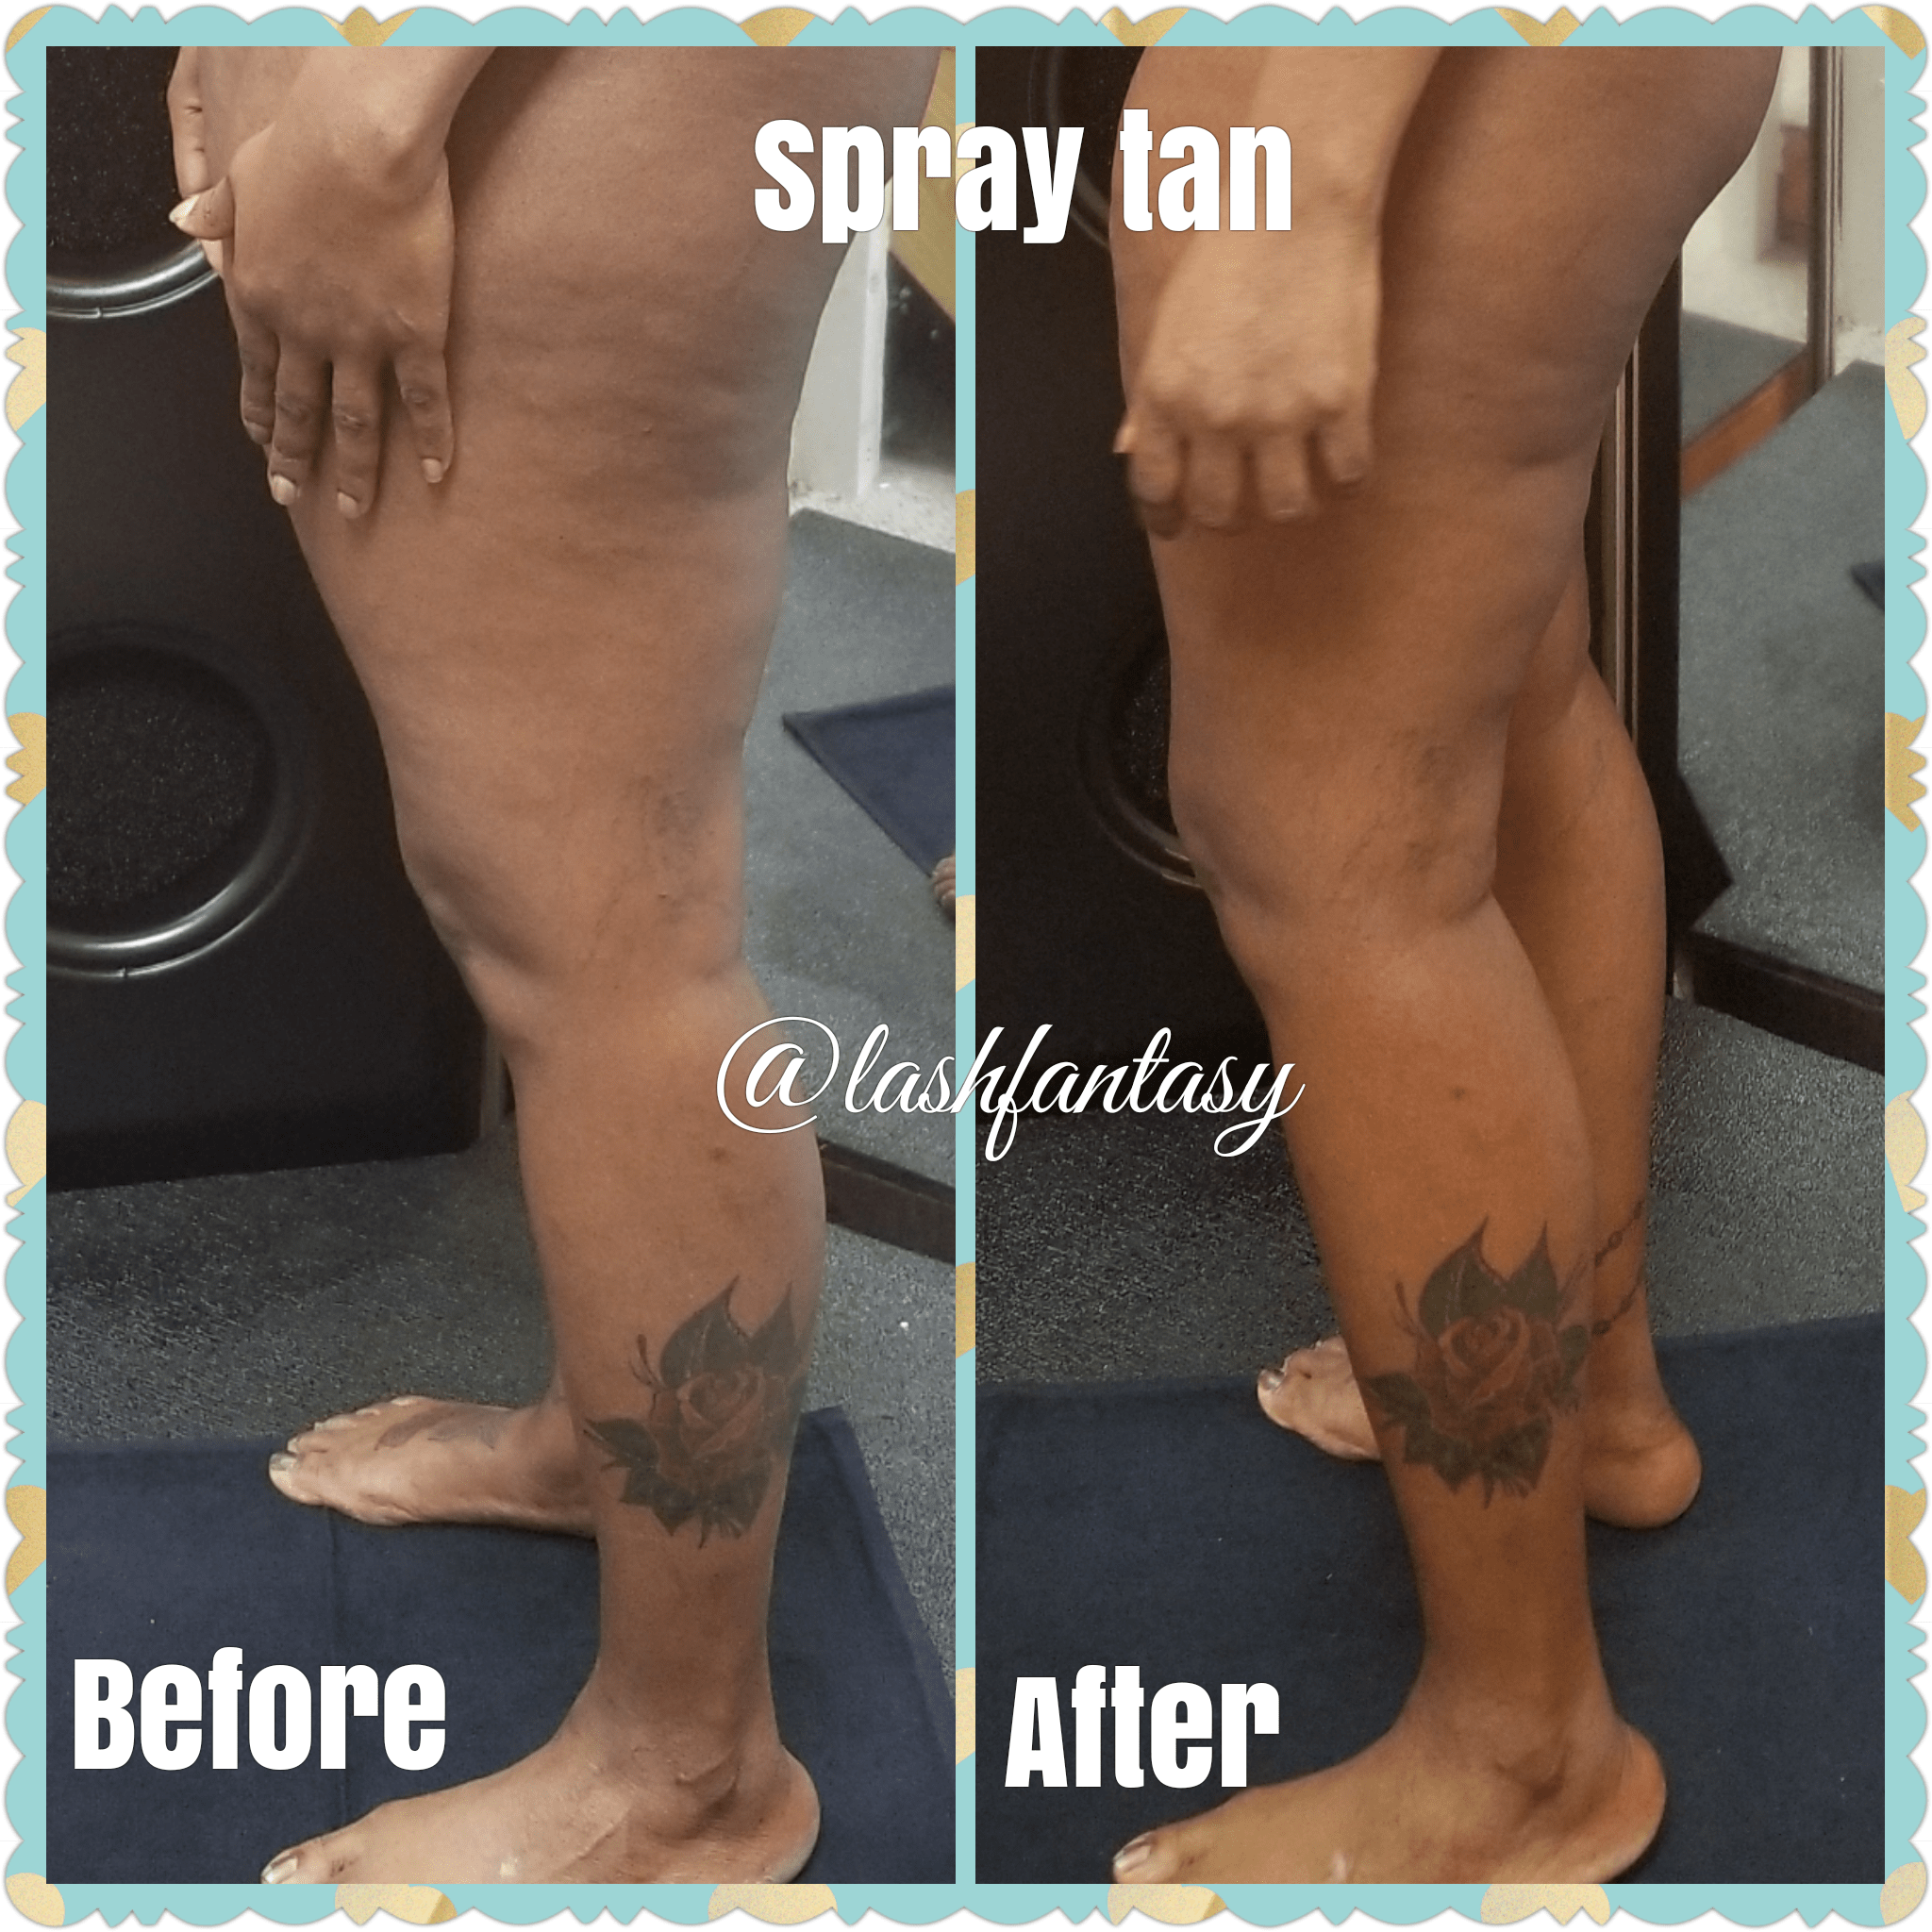 Can you spray tan over a new tattoo